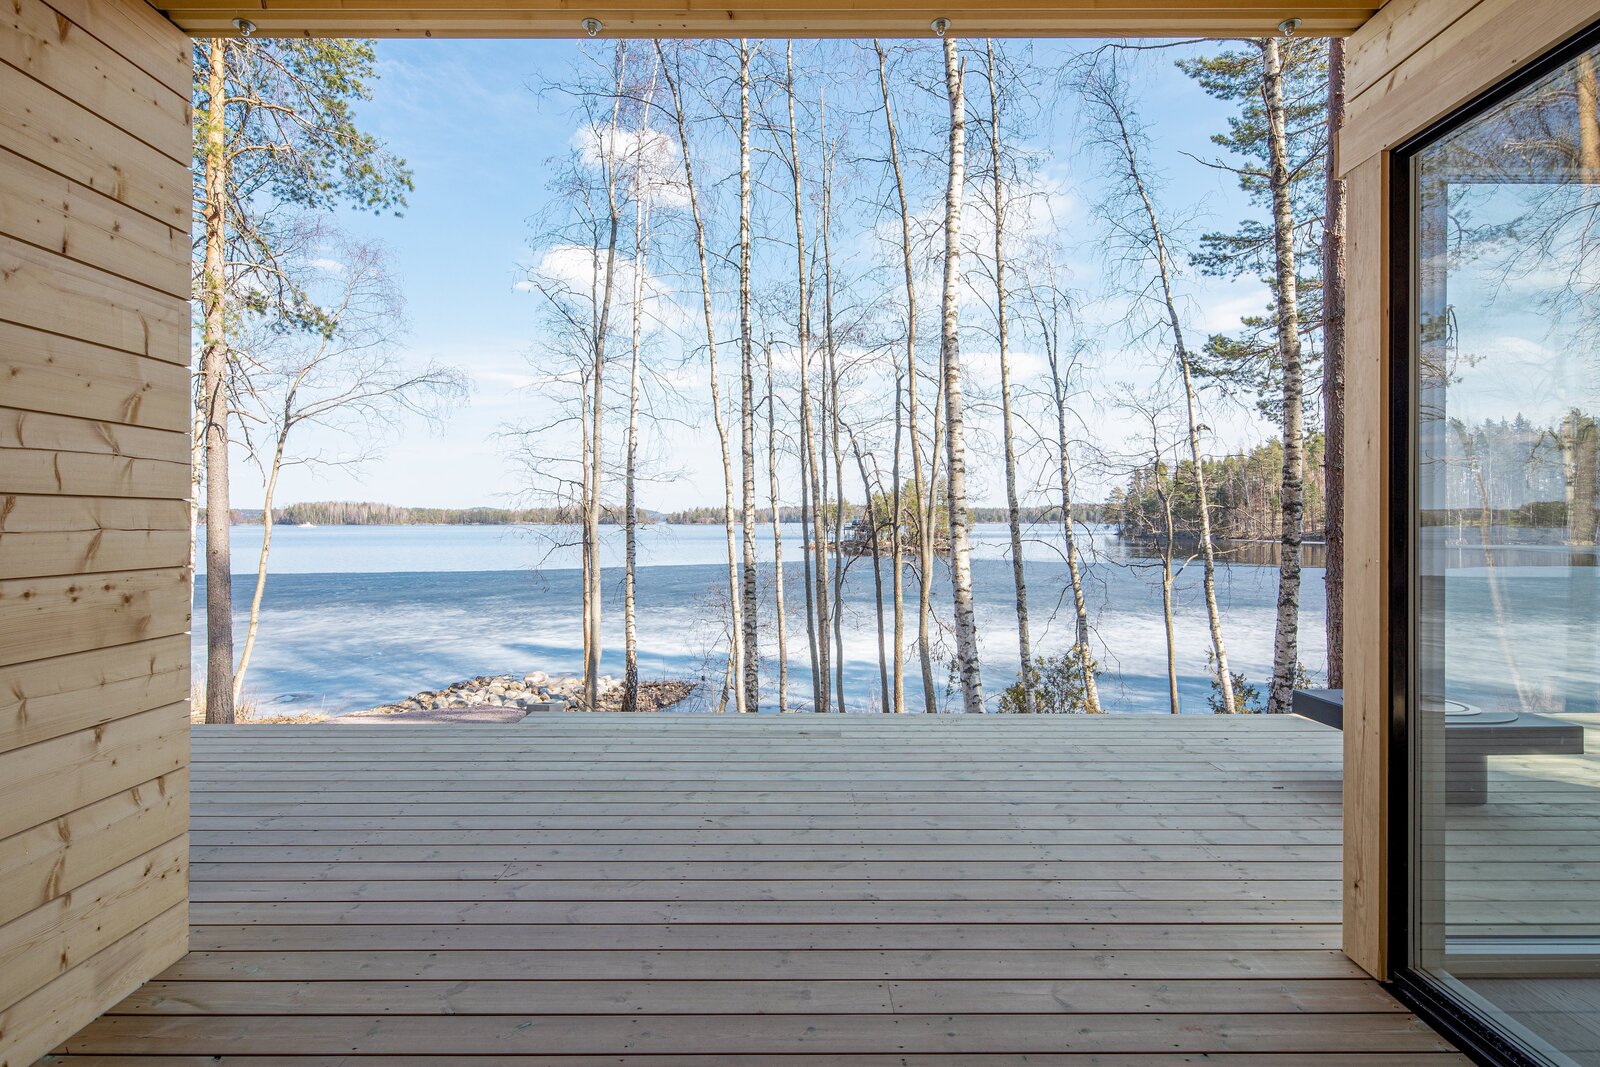 A Log Cabin Kit Sauna Is Built Lakeside for a Post-Steam Plunge in Finland